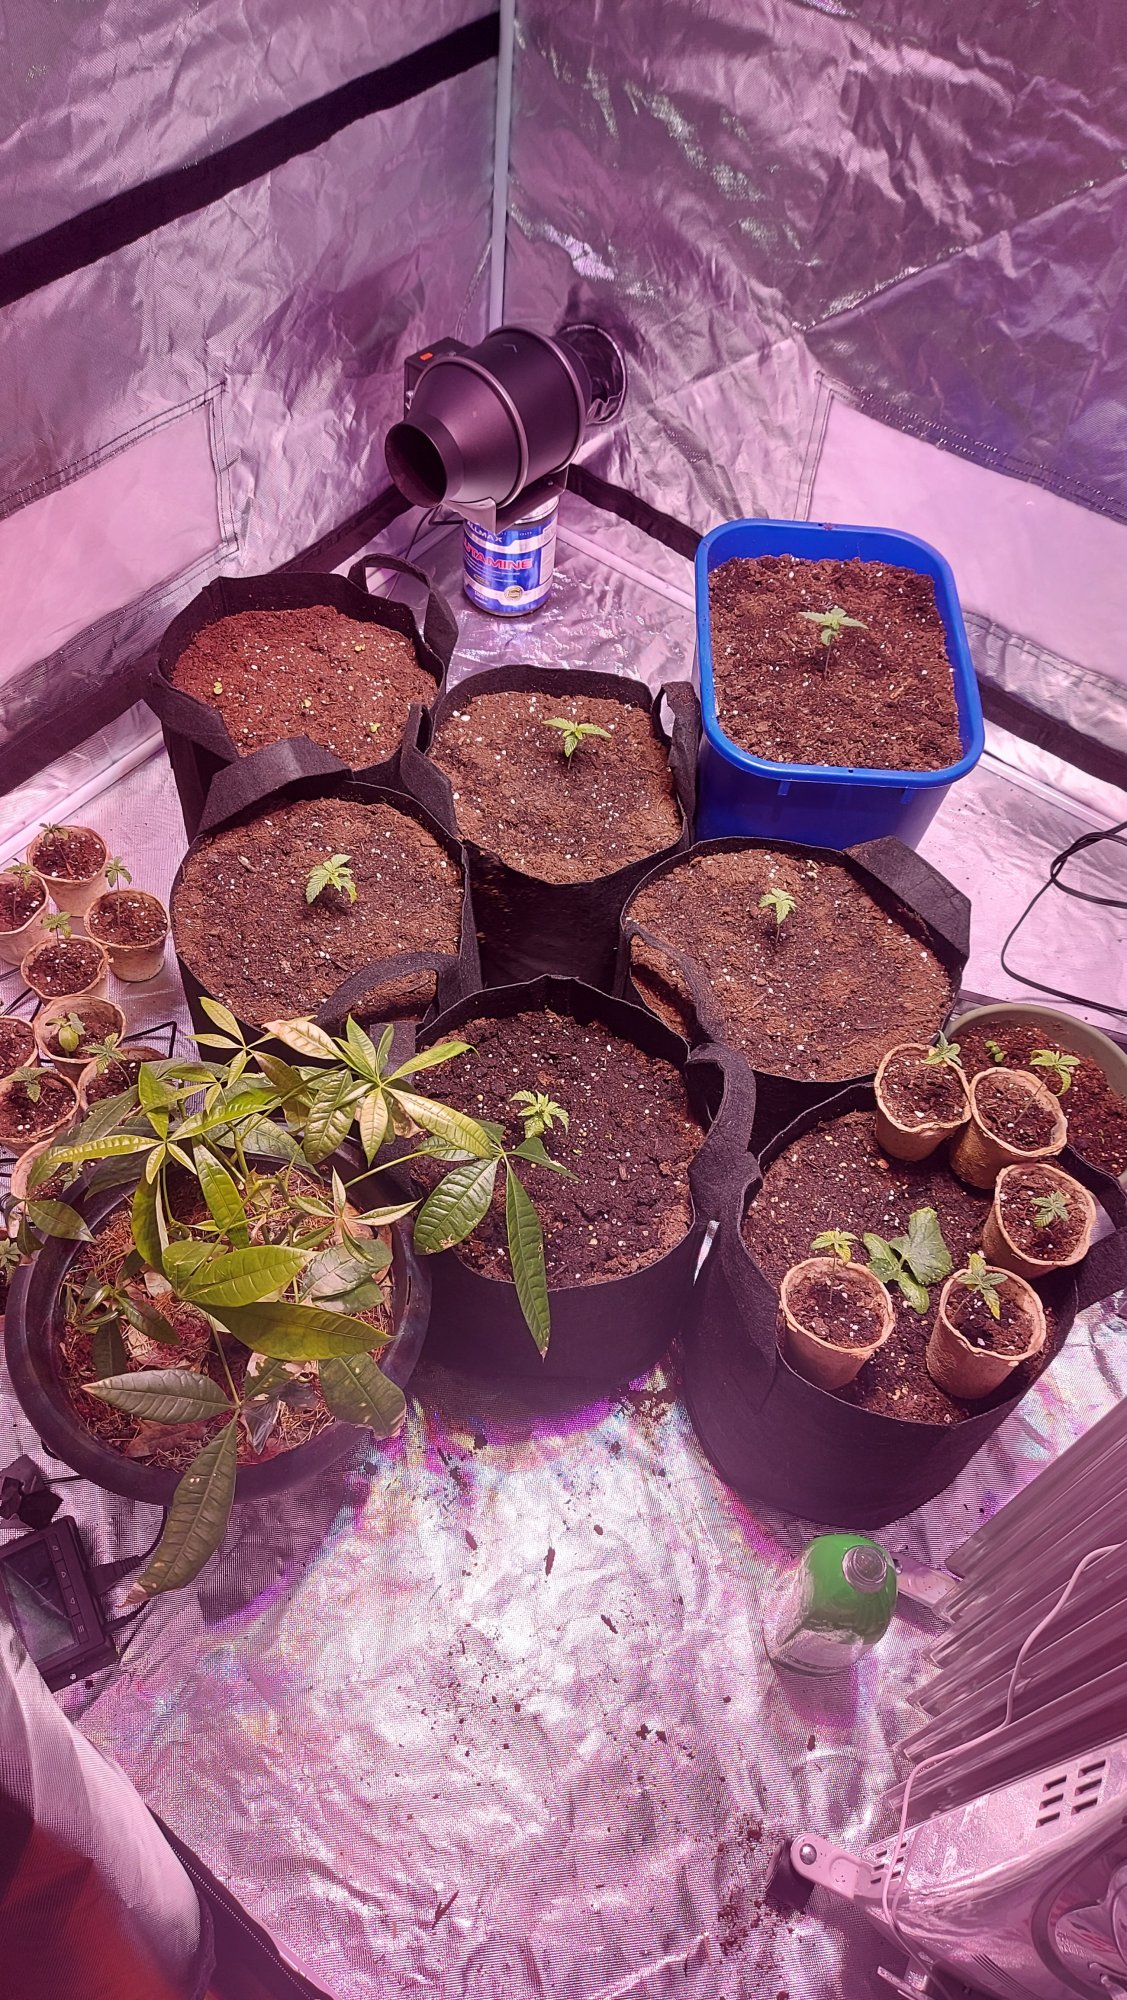 Diaries of my first grow ever  with pics